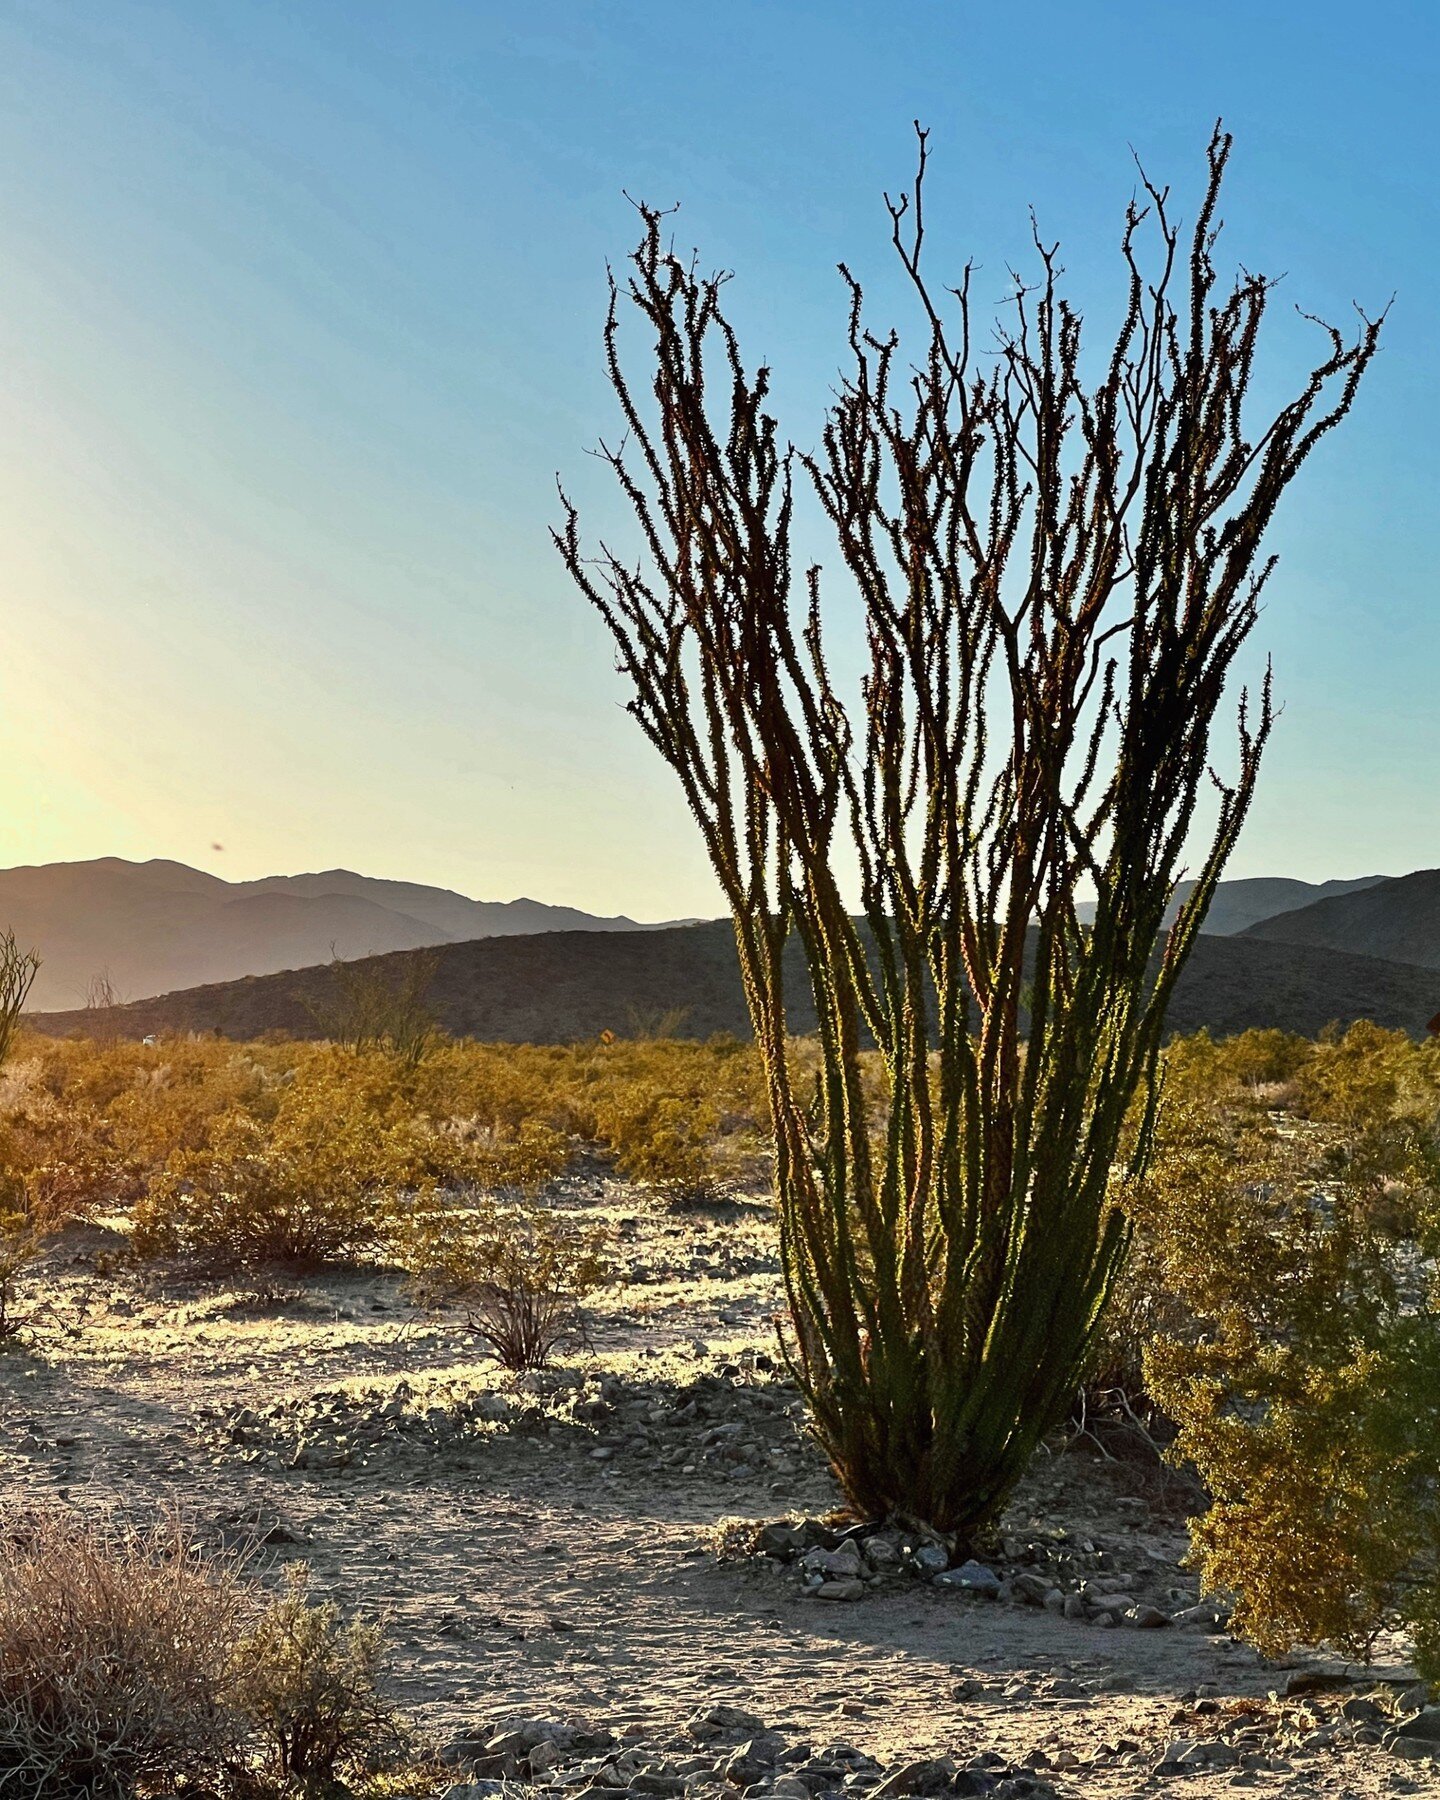 Joshua Tree is magical with its trees and cactuses that are reminiscent of a Dr. Sues storybook. We love it here.

📍Joshua Tree National Park
📍Bajada Trail
📍Ocotillo Patch
📍Cottonwood Springs

#wanderlust #wanderfolk #stayandwander #visualwanderl